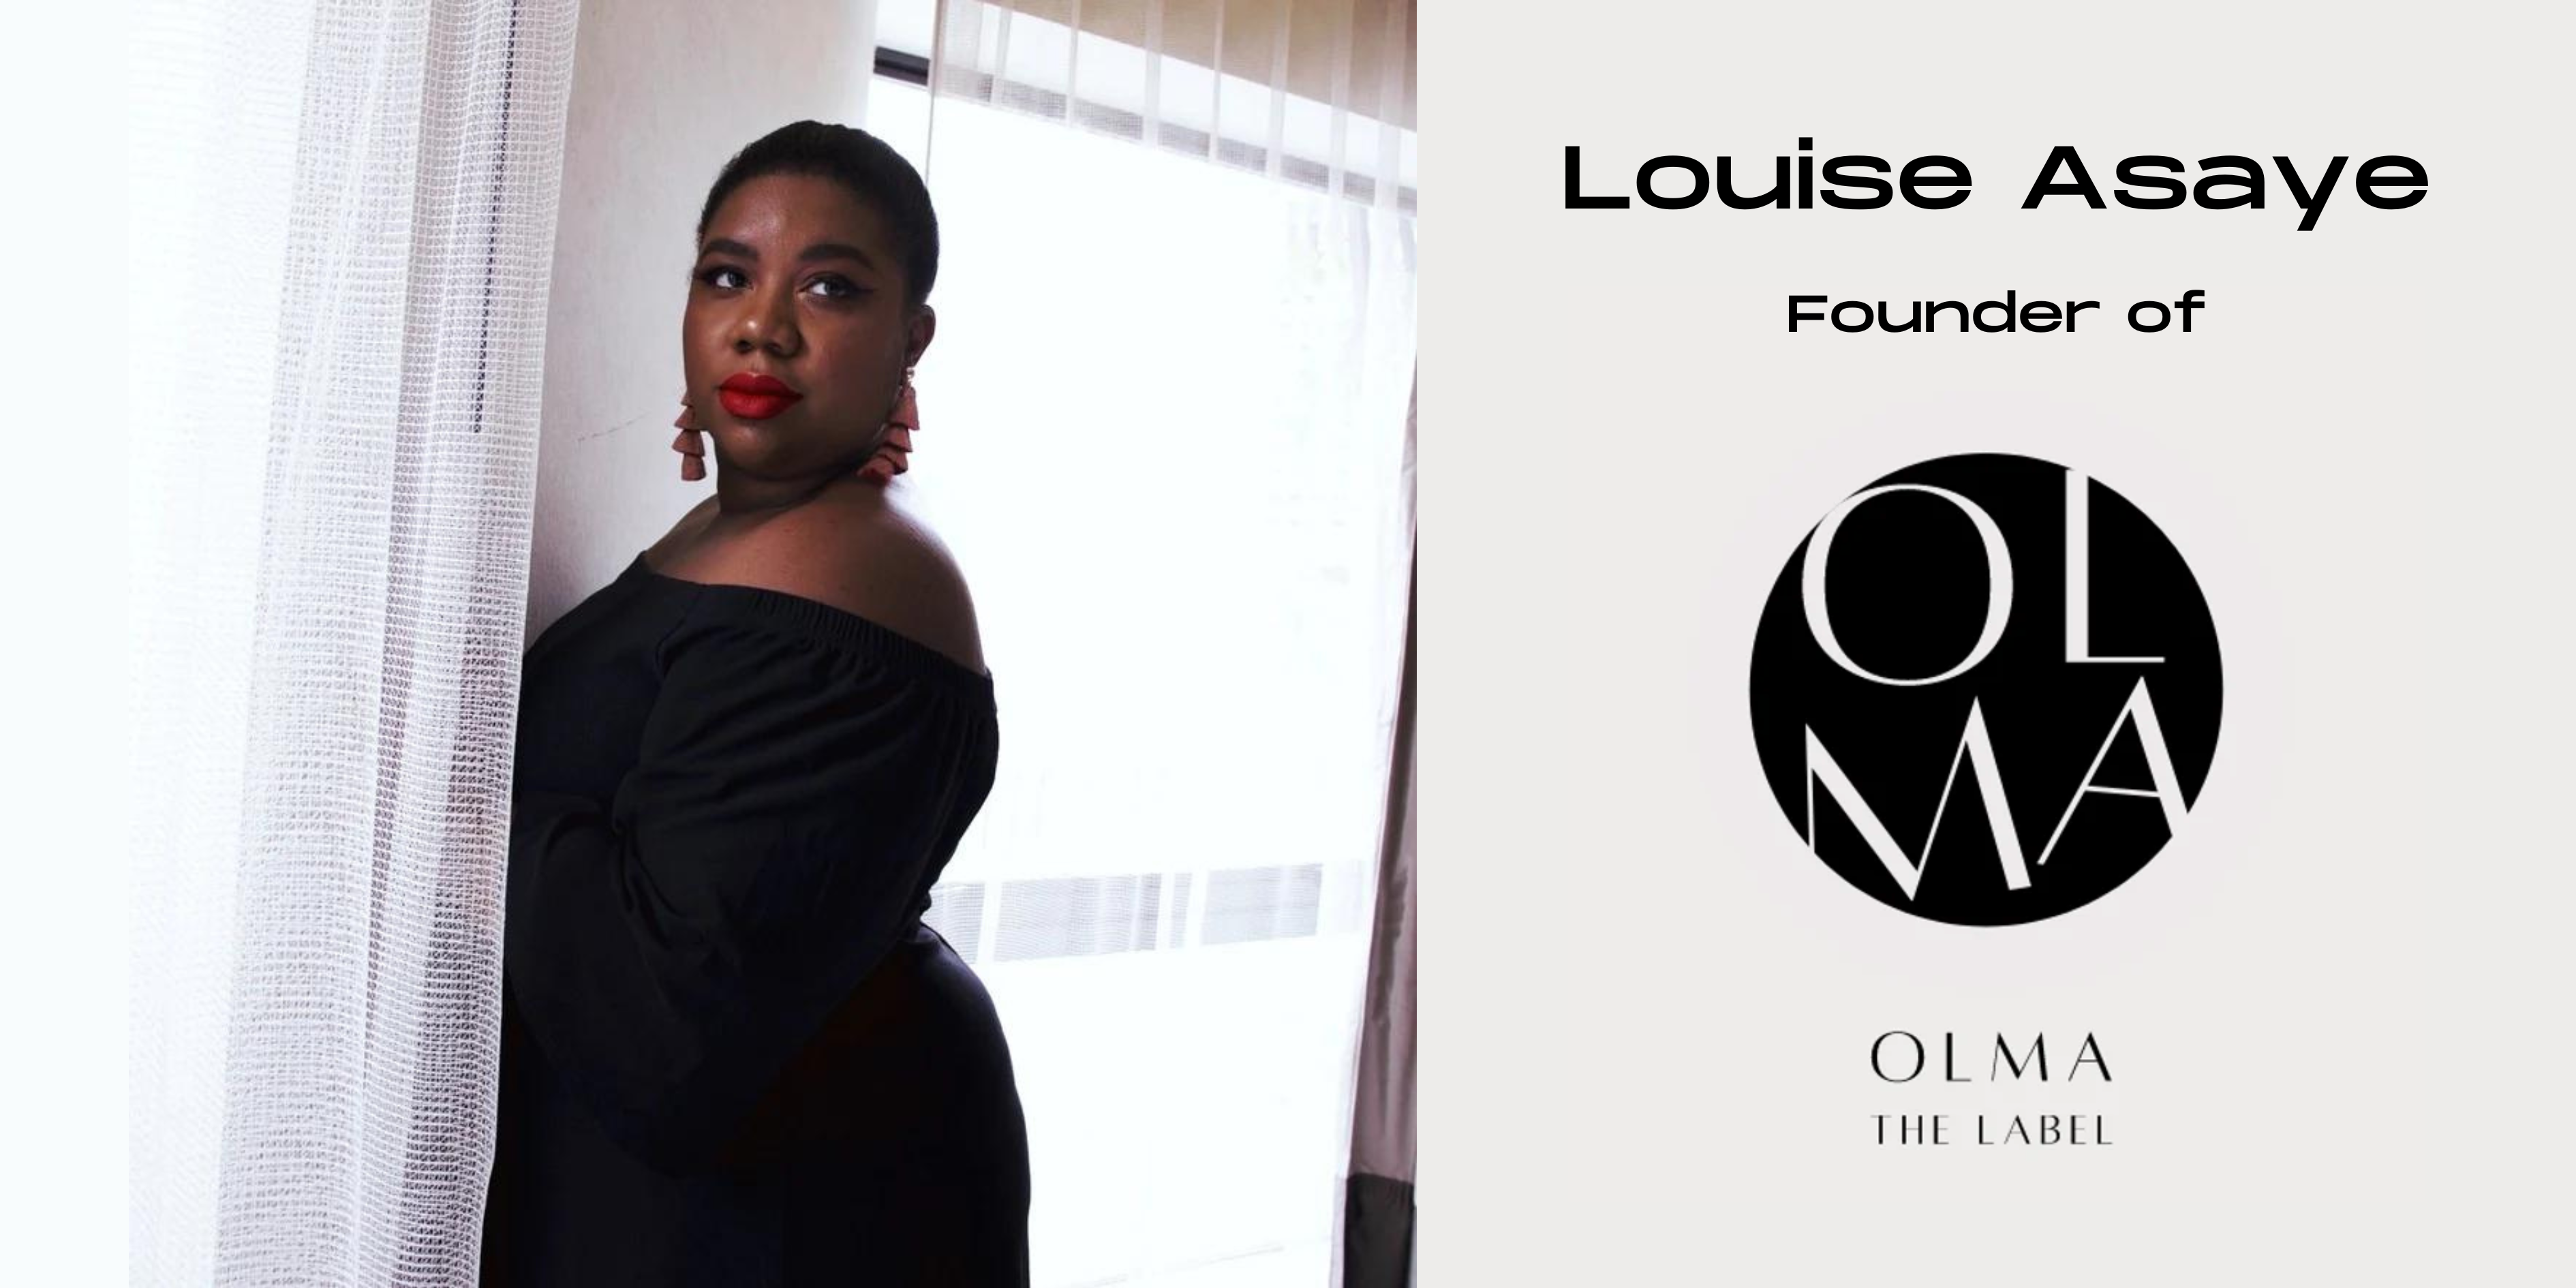 Meet Spacecubed member, Louise Asaye, who inspires women through her inclusive fashion line, Olma the Label